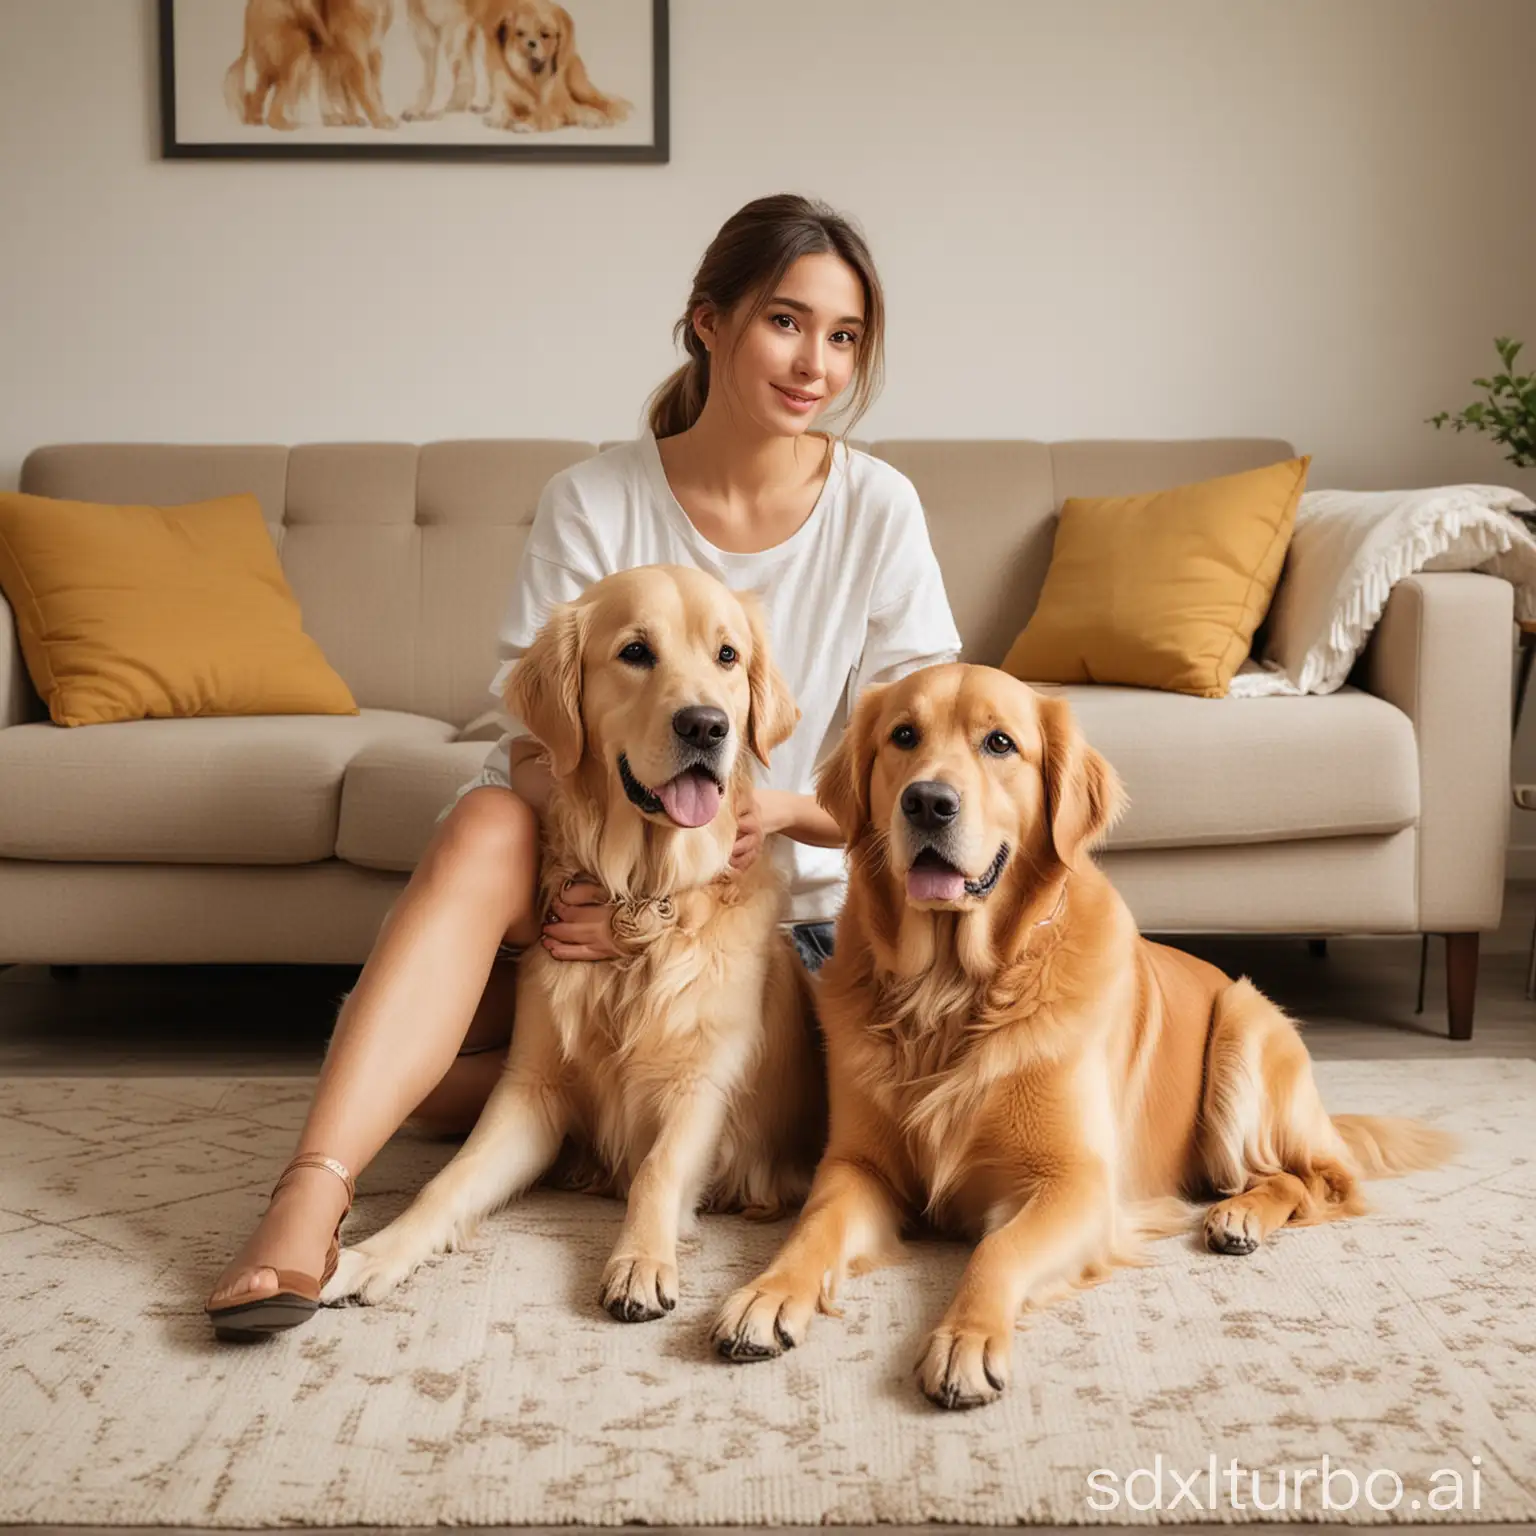 Beautiful-Woman-with-Golden-Retriever-in-Living-Room-Scene